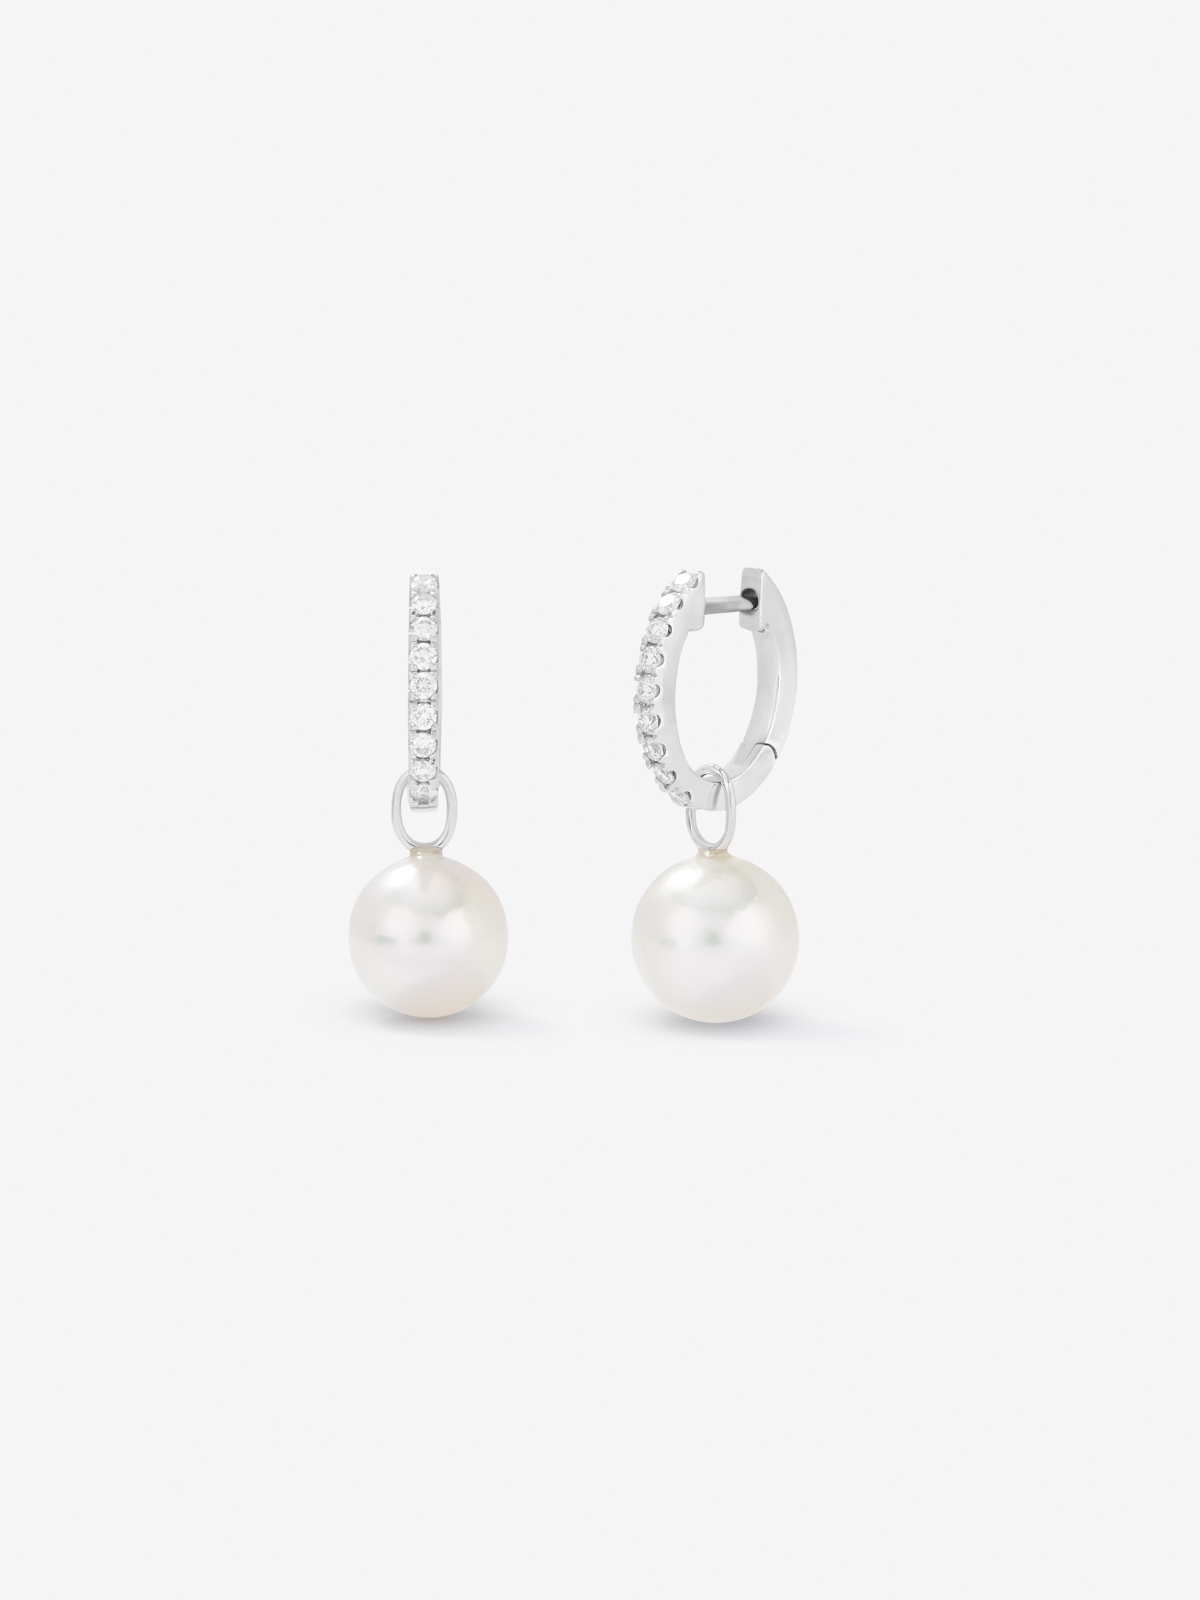 18k white gold hoop earring with 8.5mm Akoya pearl pendant and diamond.